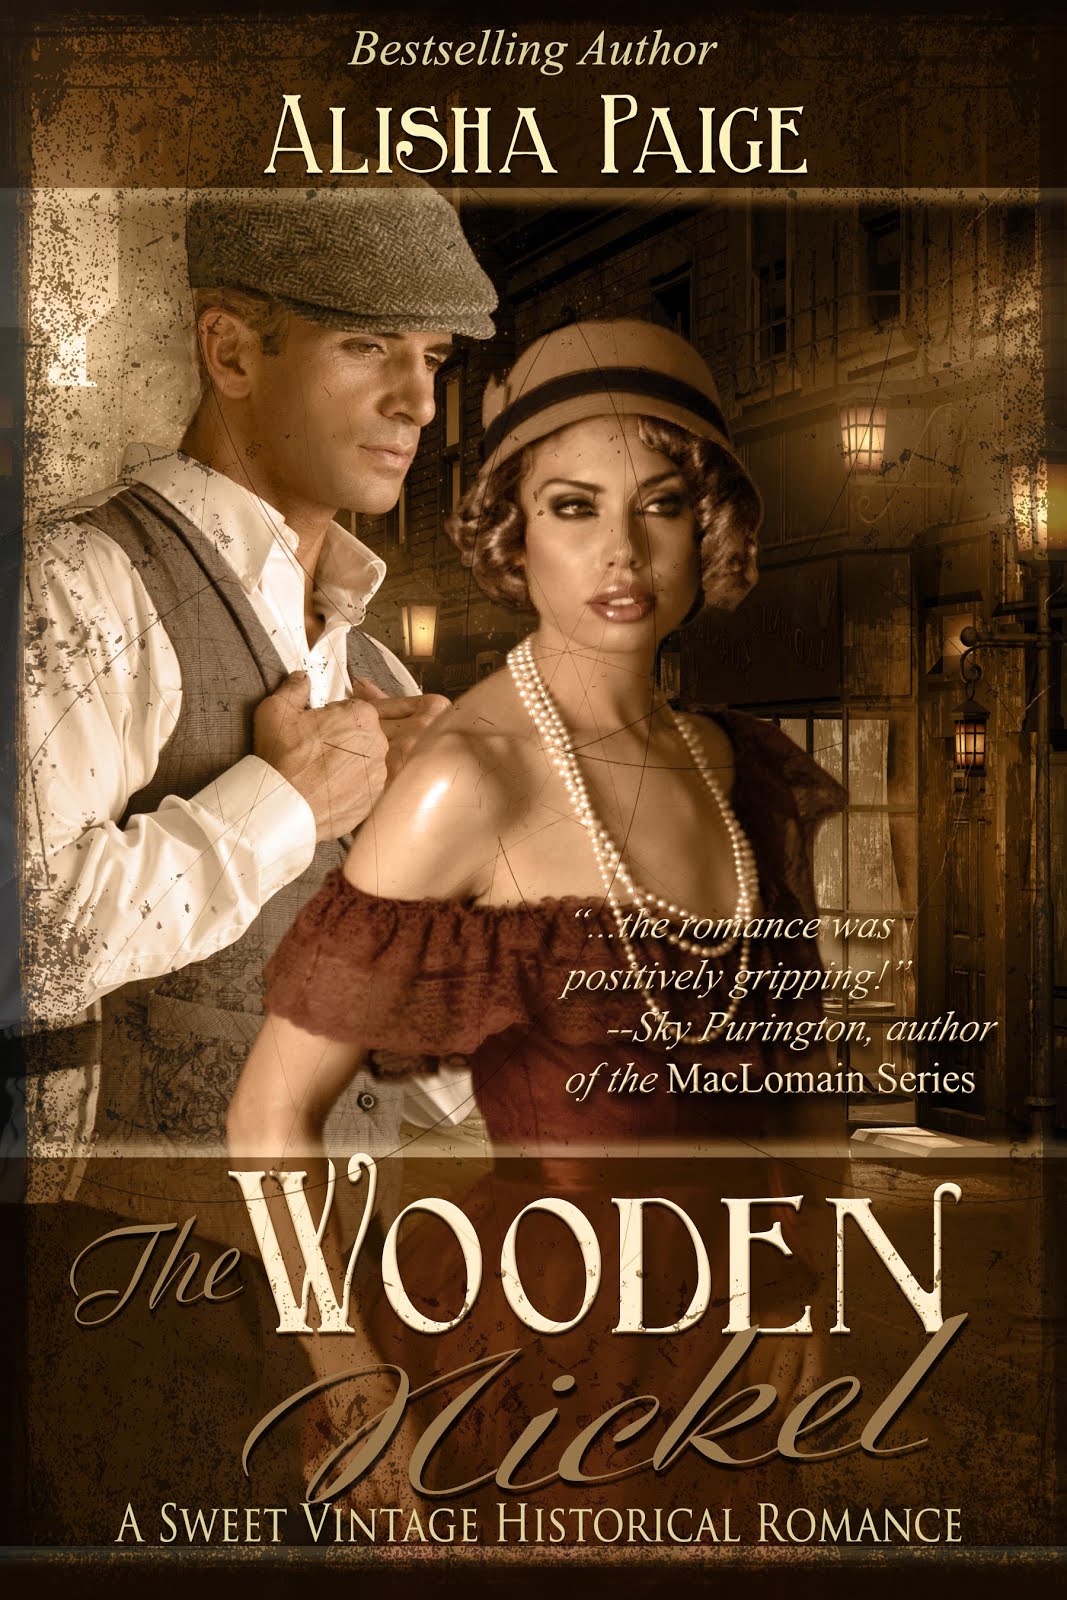 Full Length Epic Historical Romance set during The Great Depression and the Holocaust